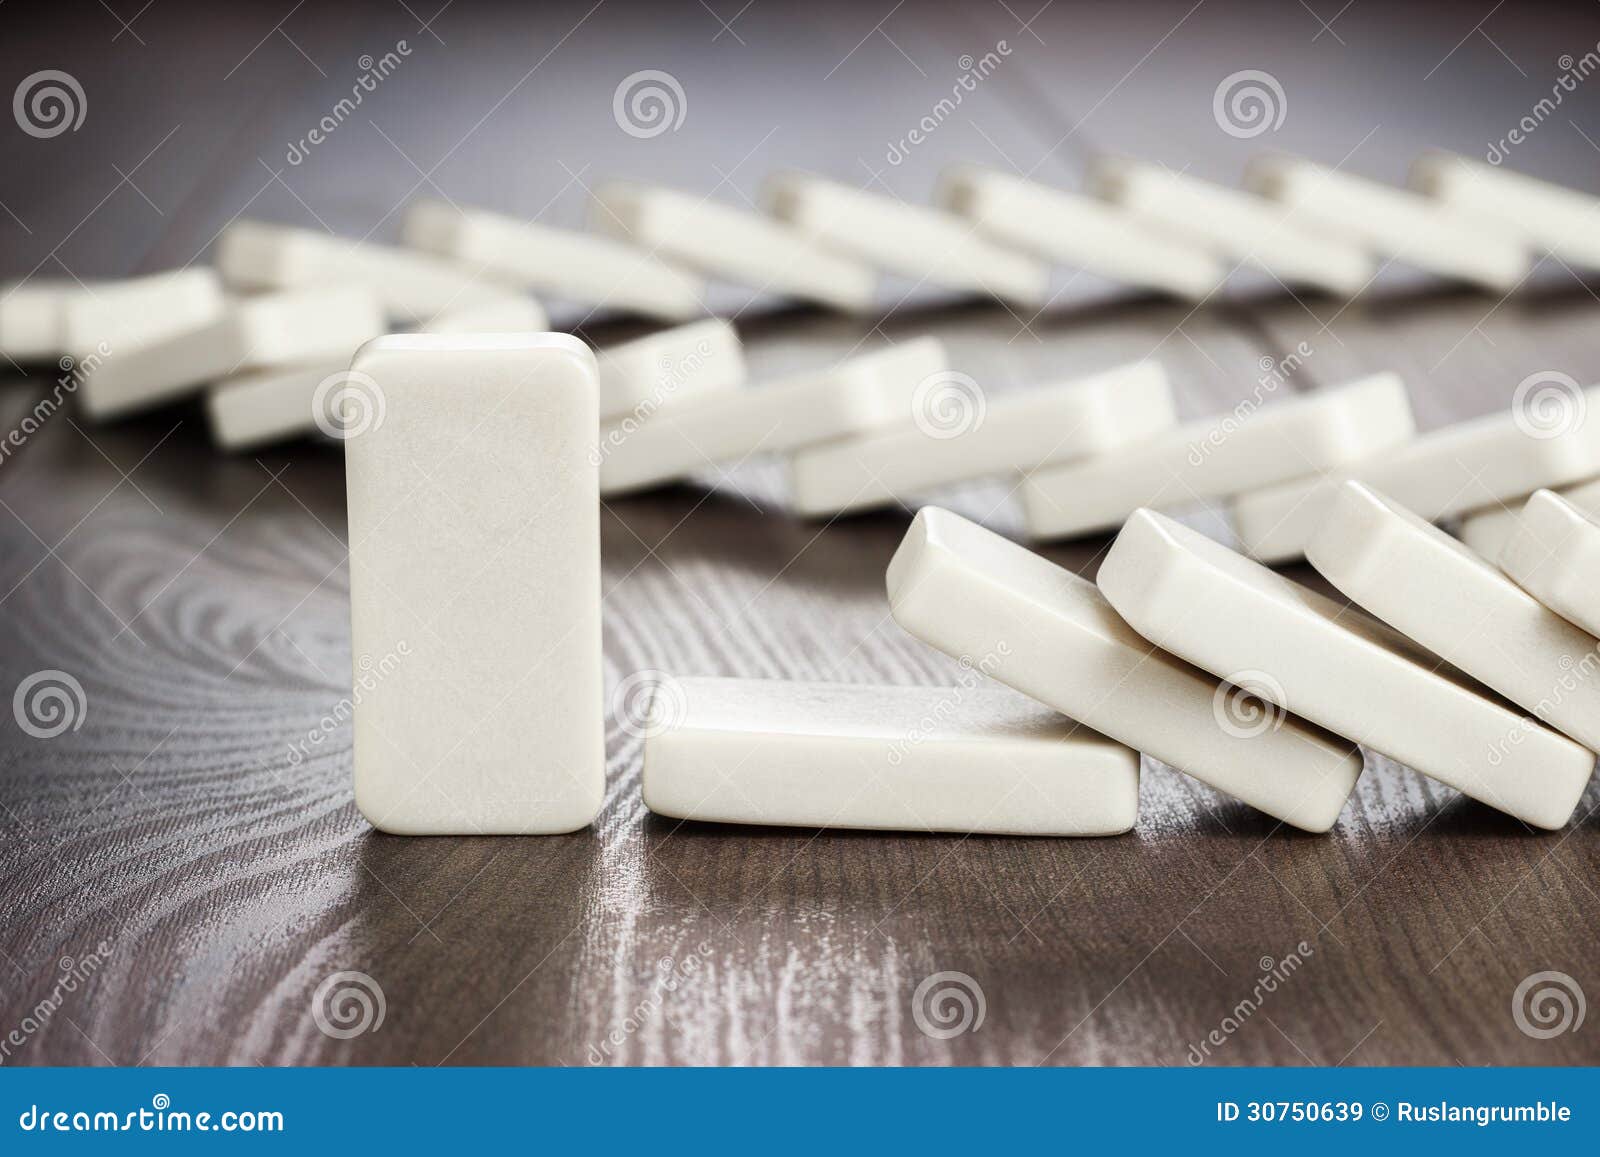 Domino Piece Standing Still Concept Royalty Free Stock Images - Image 